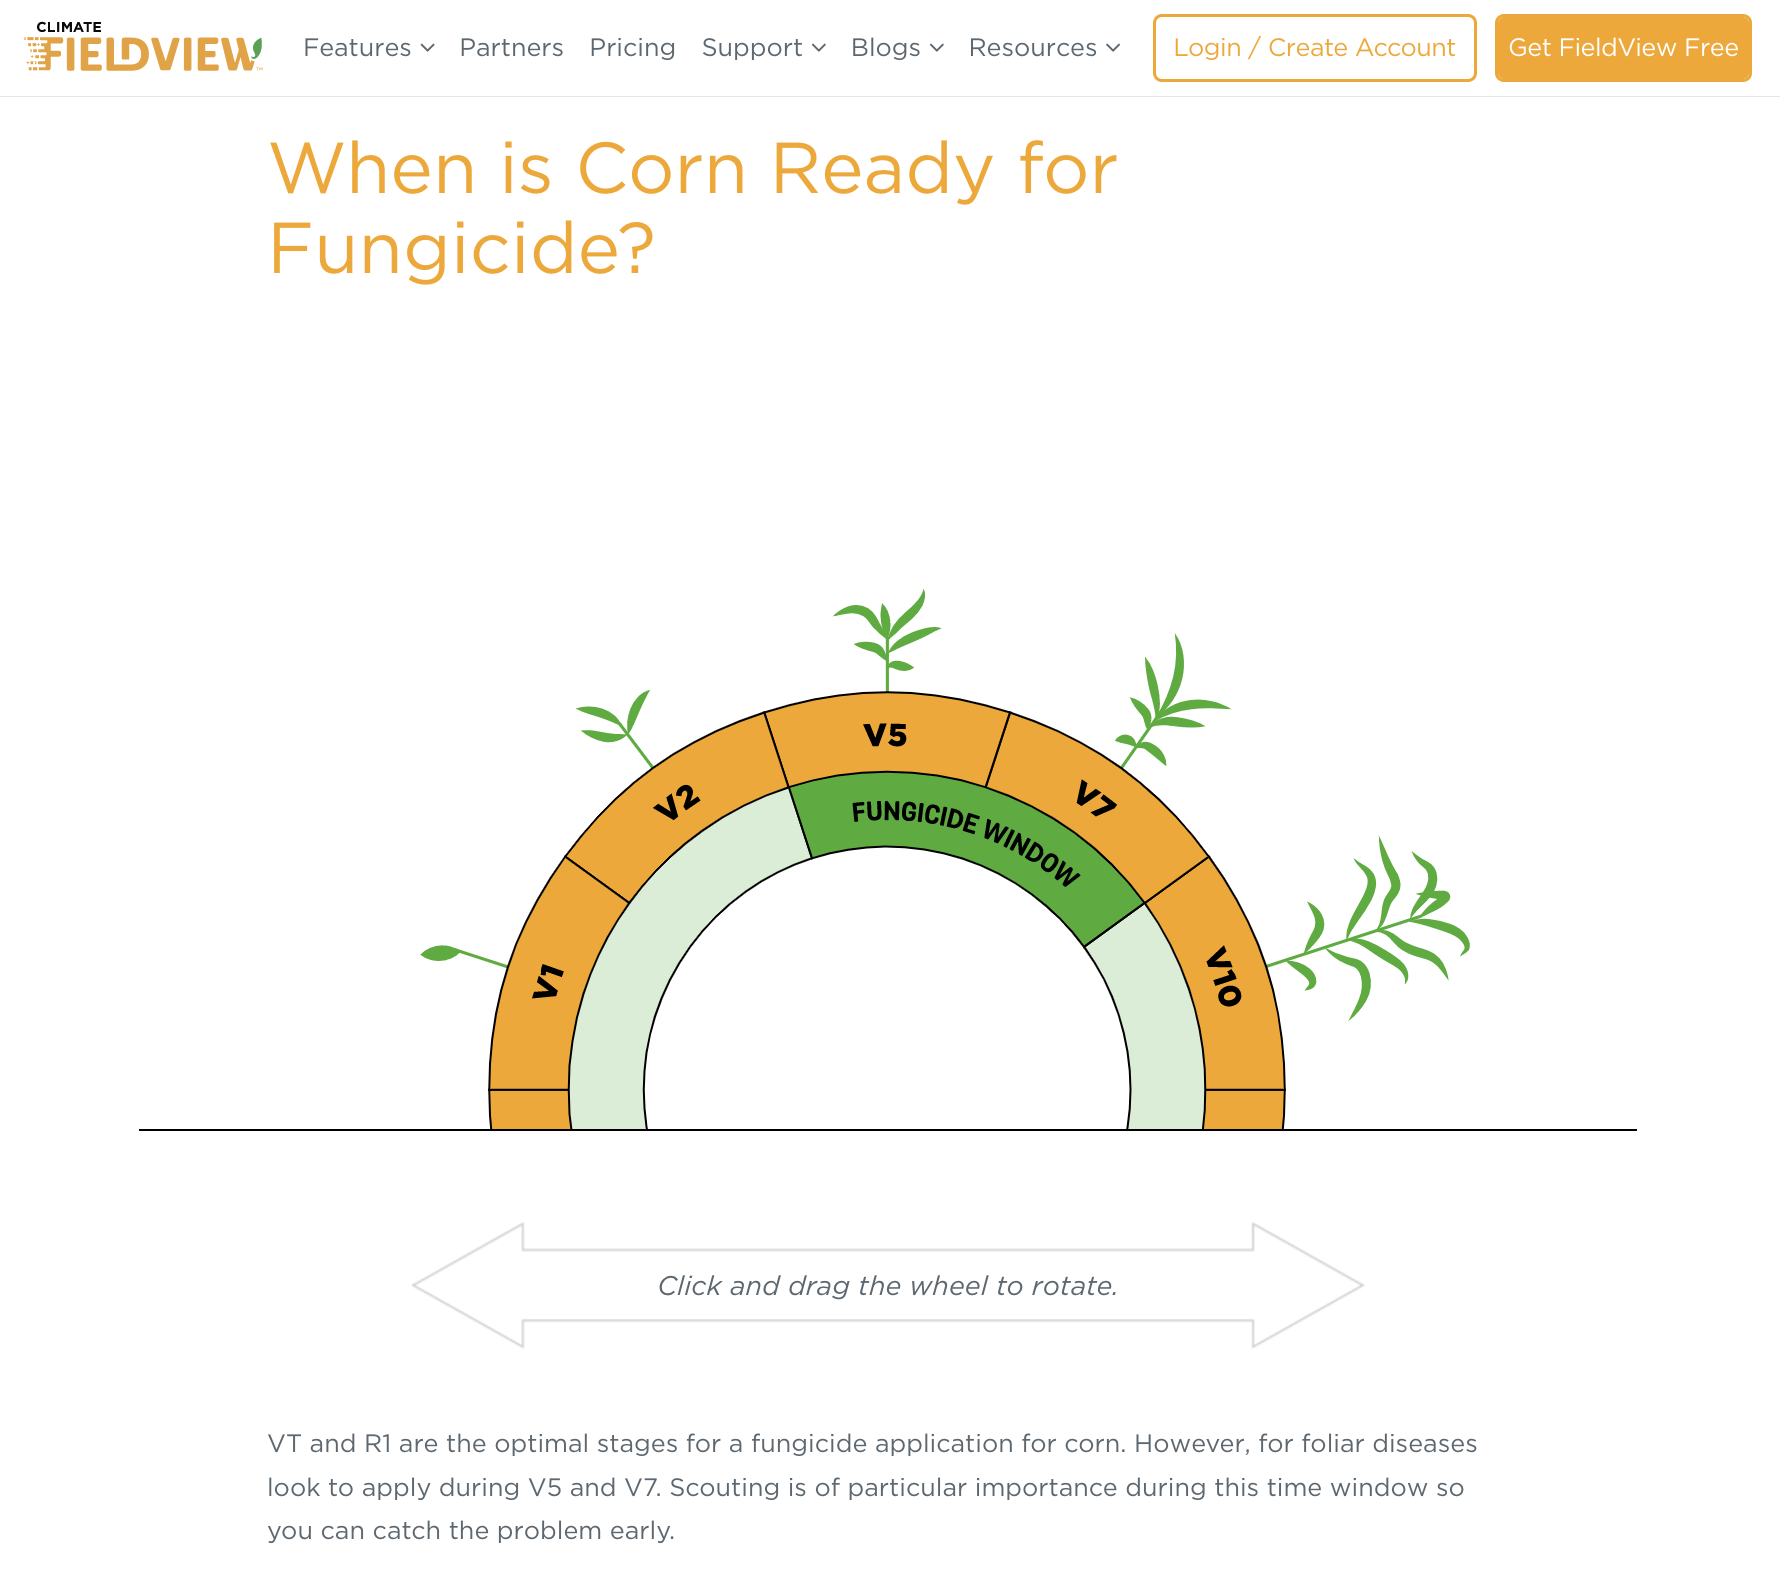 Blogging Content Marketing Examples: Climate Fieldview